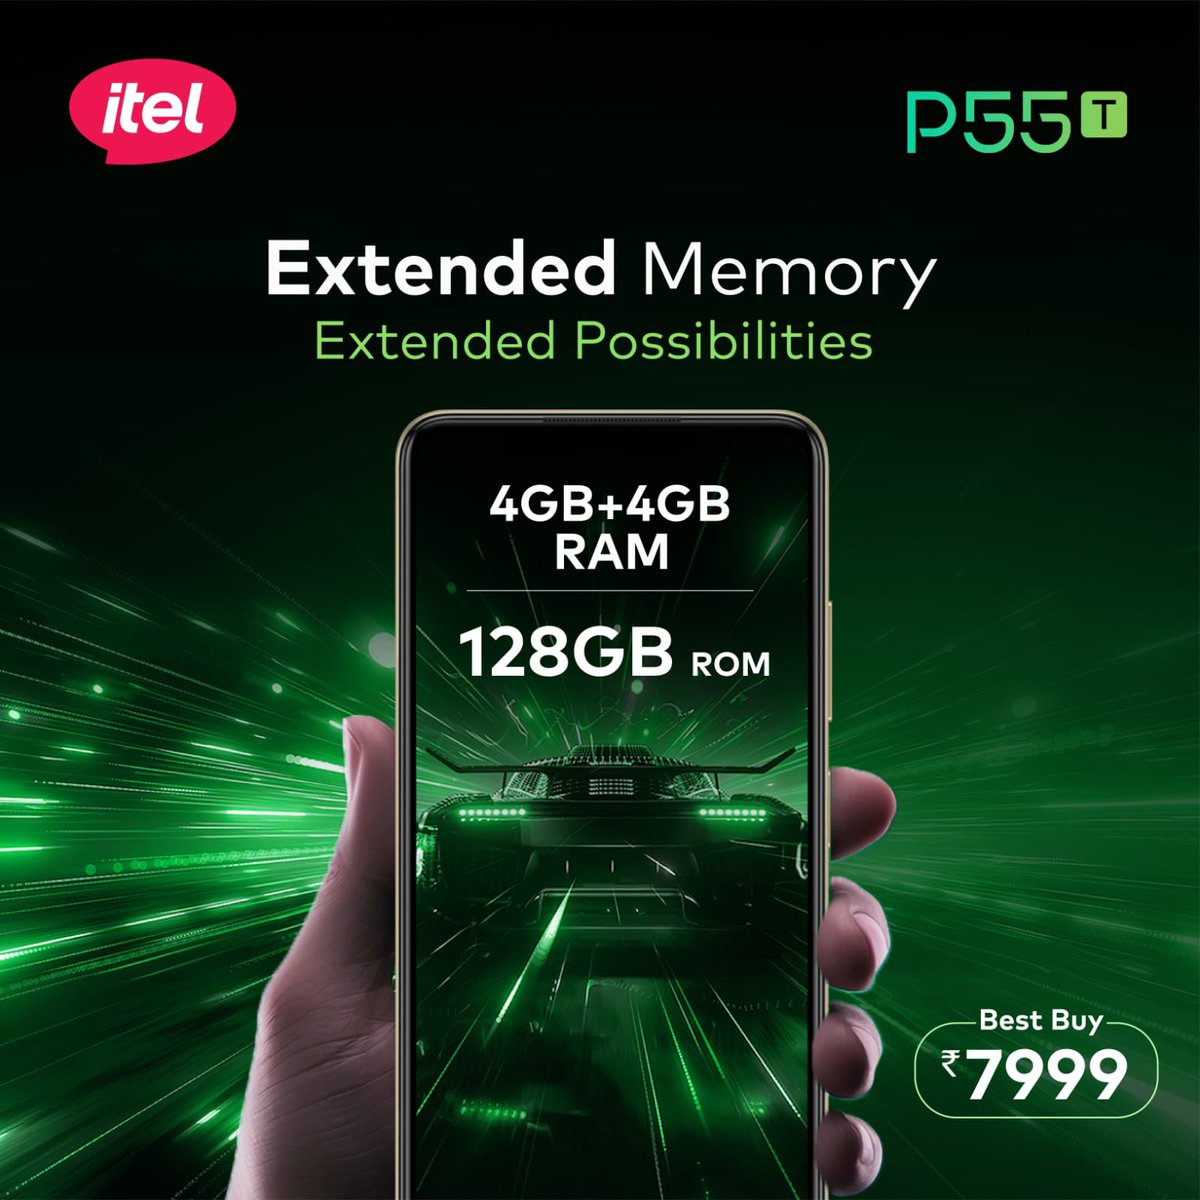 Extended Memory for extended possibilities with upto 8GB RAM through Memory Fusion. Experience innovation like never before. #itelP55T #enjoybetterlife